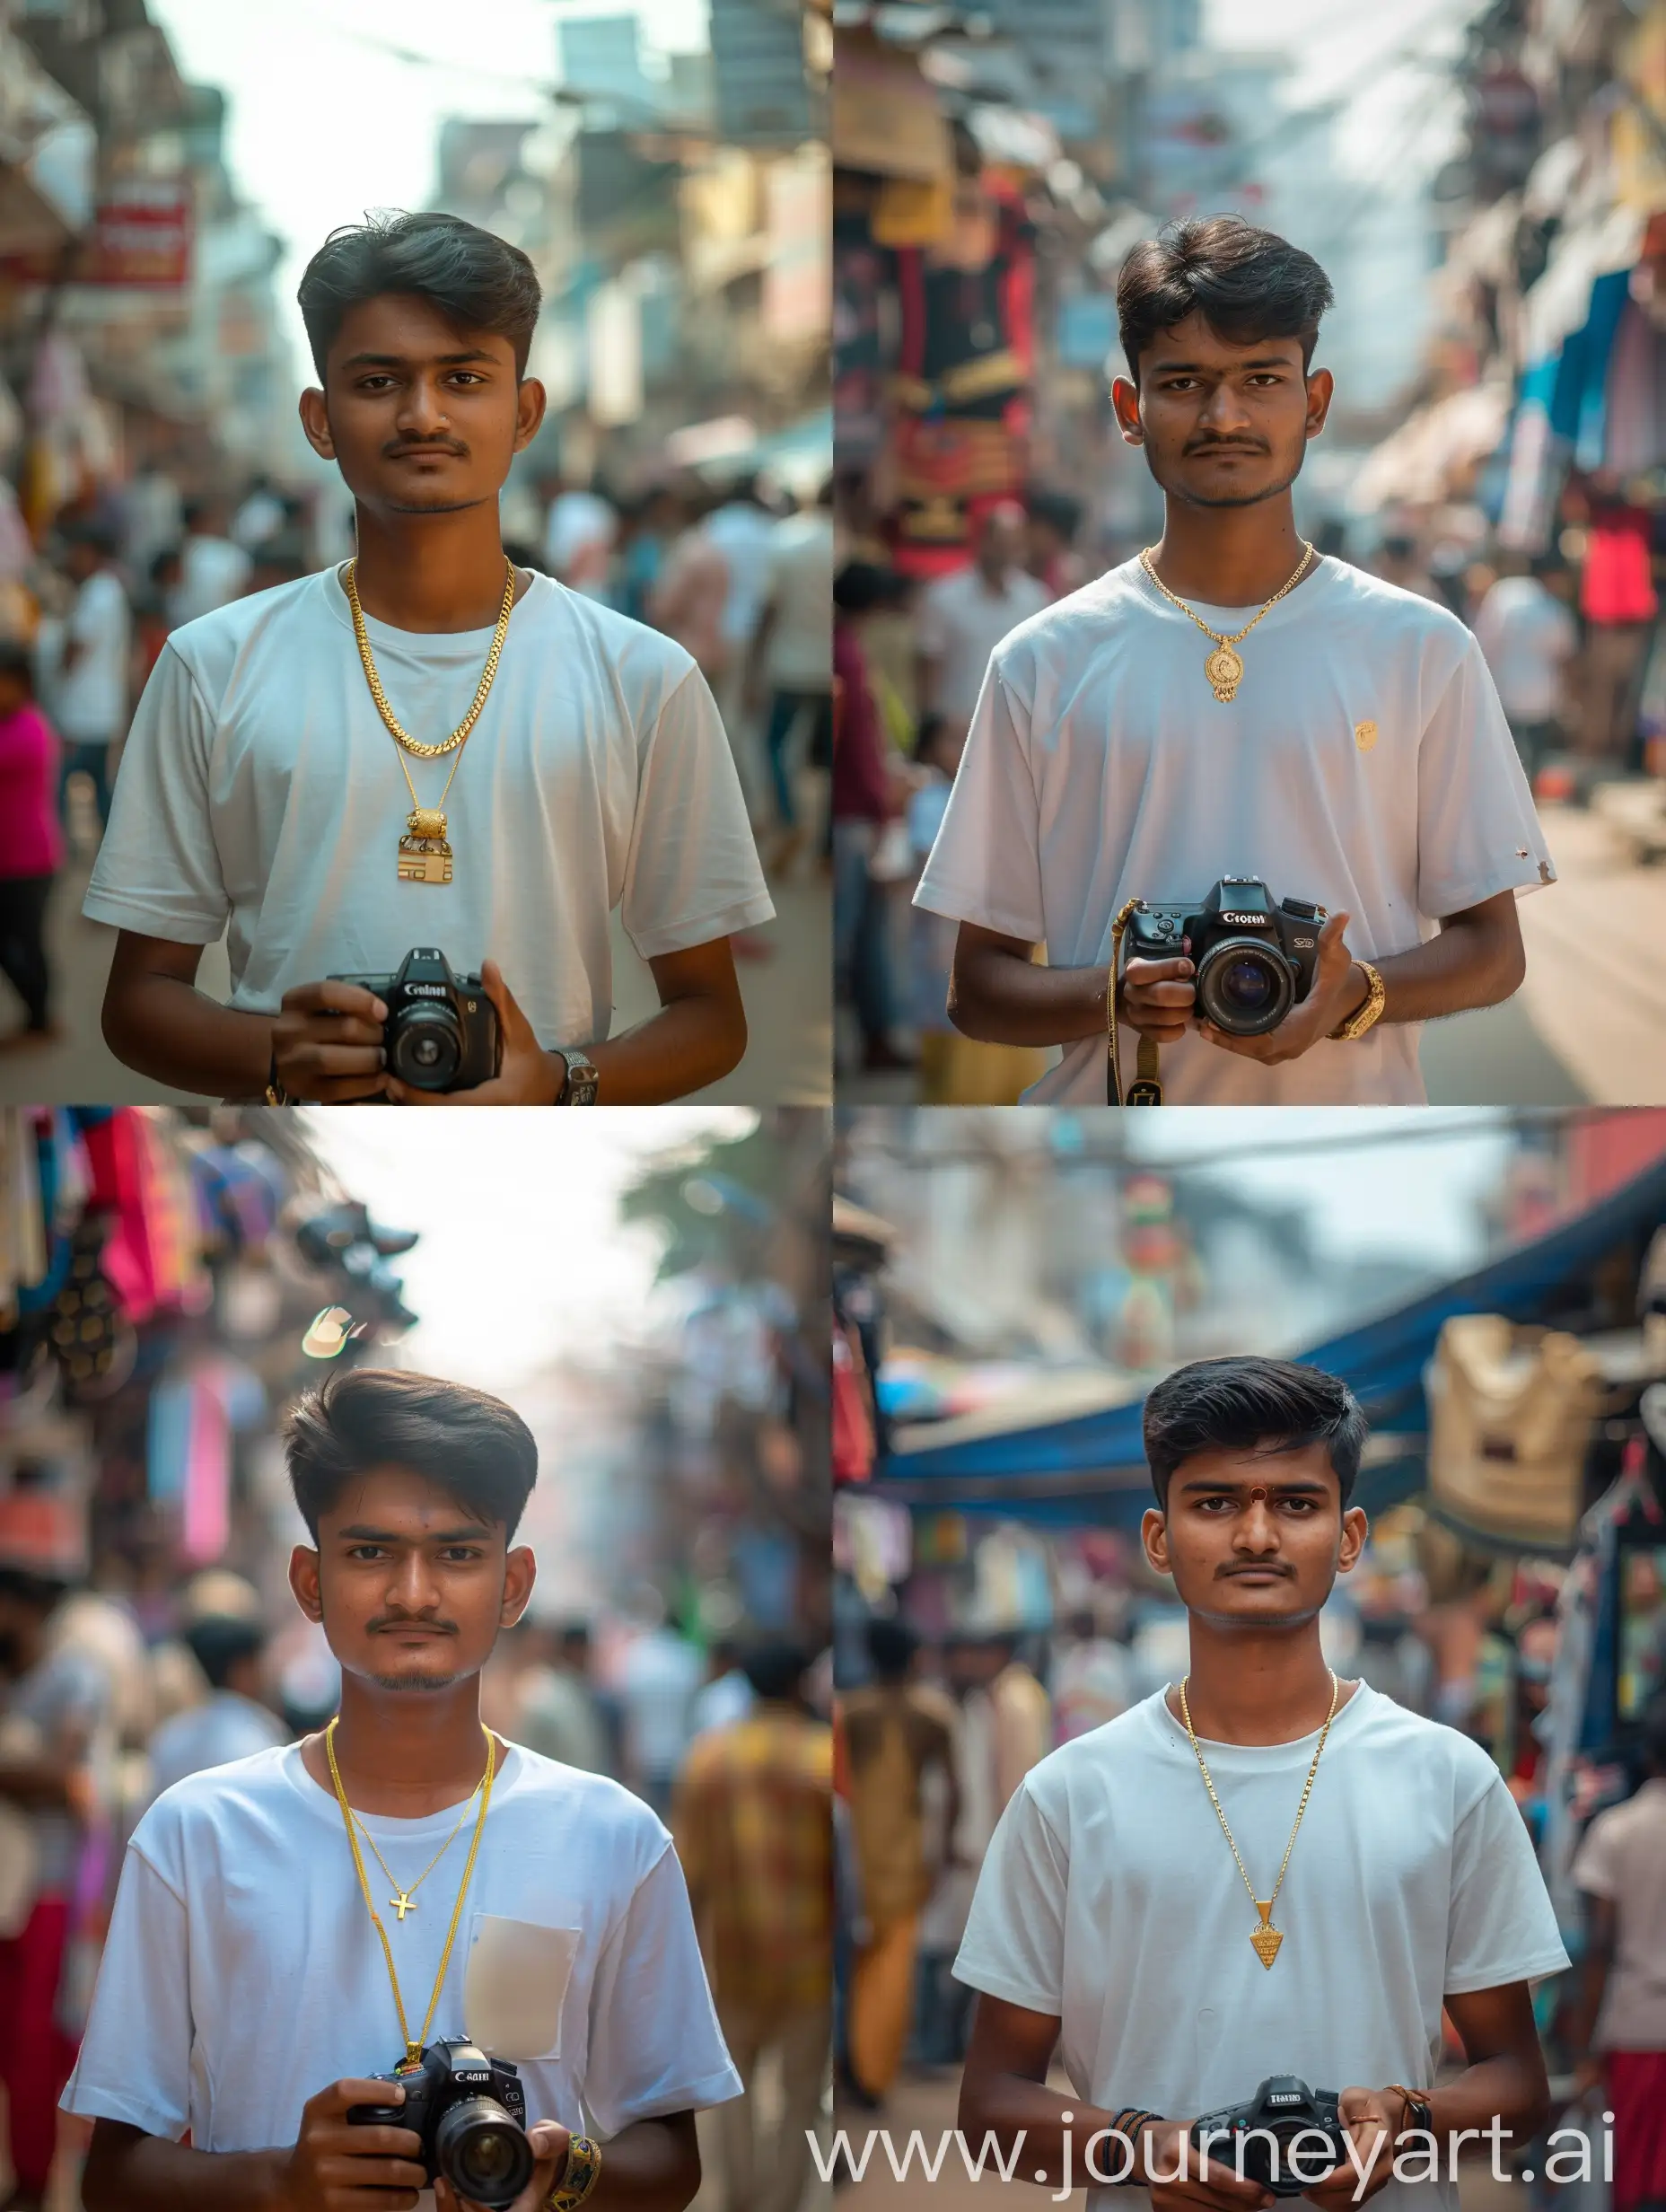 young photographer in India, 17 years old, capturing vibrant street life, wearing a simple white t-shirt, candid moment, natural light, bustling bazaar backdrop, digital SLR in hands, focused expression, cultural immersion --cref https://cdn.discordapp.com/attachments/1200713789763485788/1220053094574985438/Picsart_24-03-19_12-30-02-155.jpg?ex=660d89fd&is=65fb14fd&hm=b5132c96aecf18649273f3abf1b84c466cc0e96c6897abbc1adef24f75c4ab3e& --cw 100 --ar 3:4 --s 300 --v 6